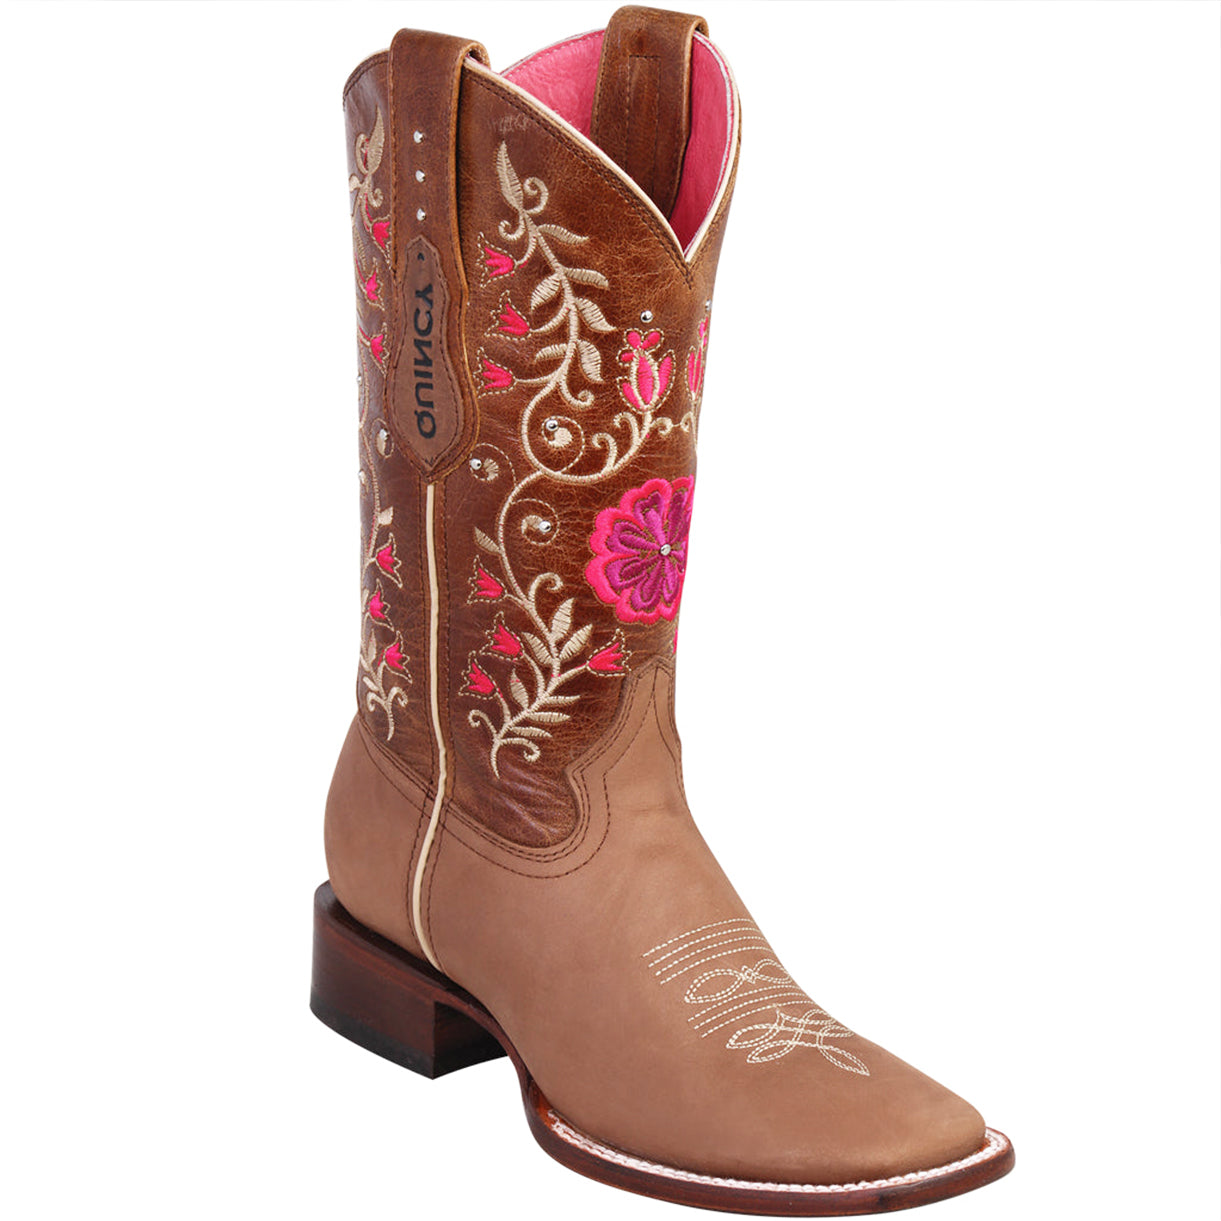 Quincy Women's Tan Flowered Cowgirl Boots